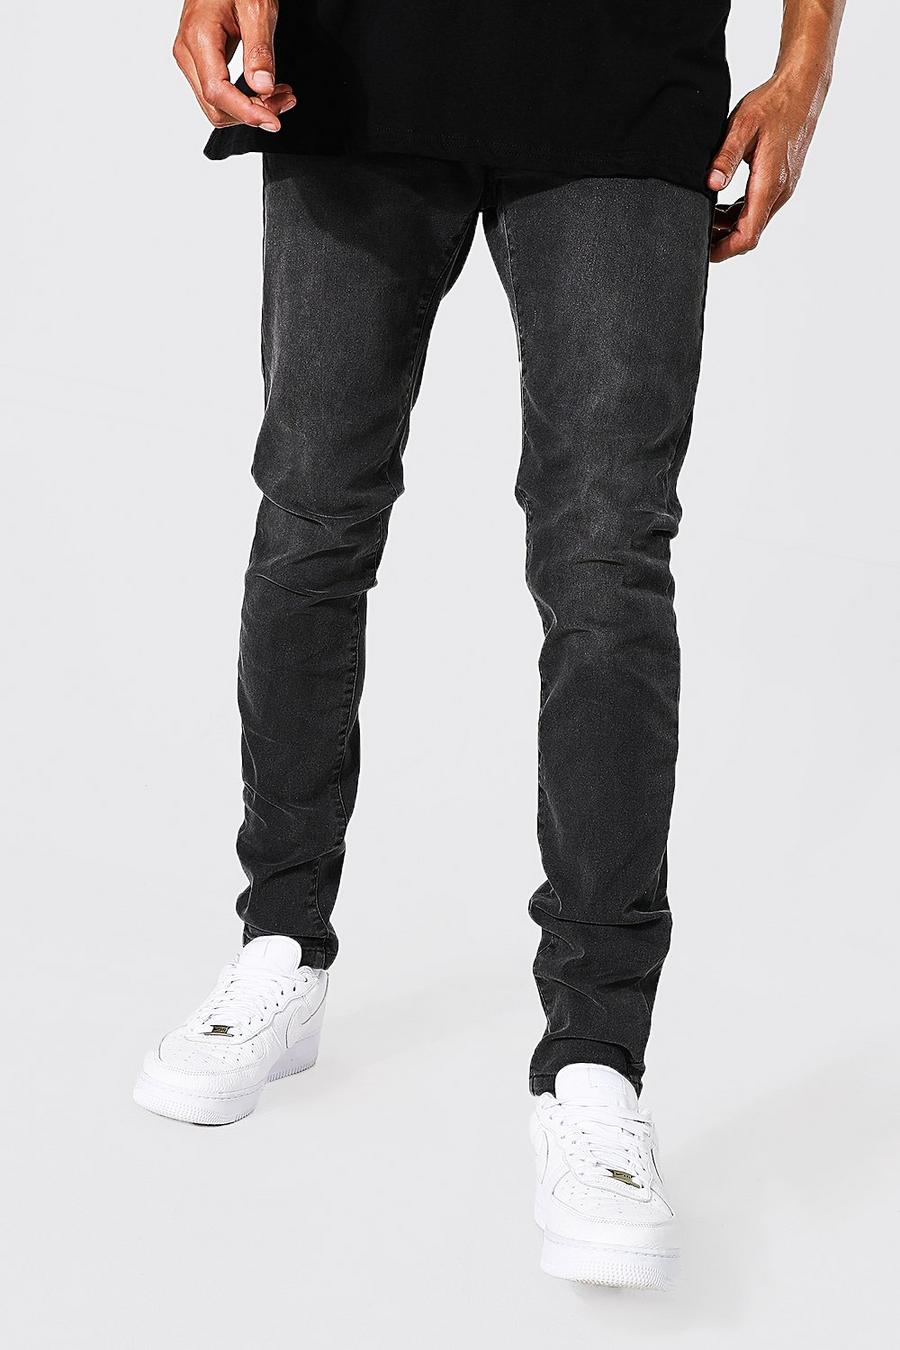 Charcoal grey Tall Stretch Skinny Jeans